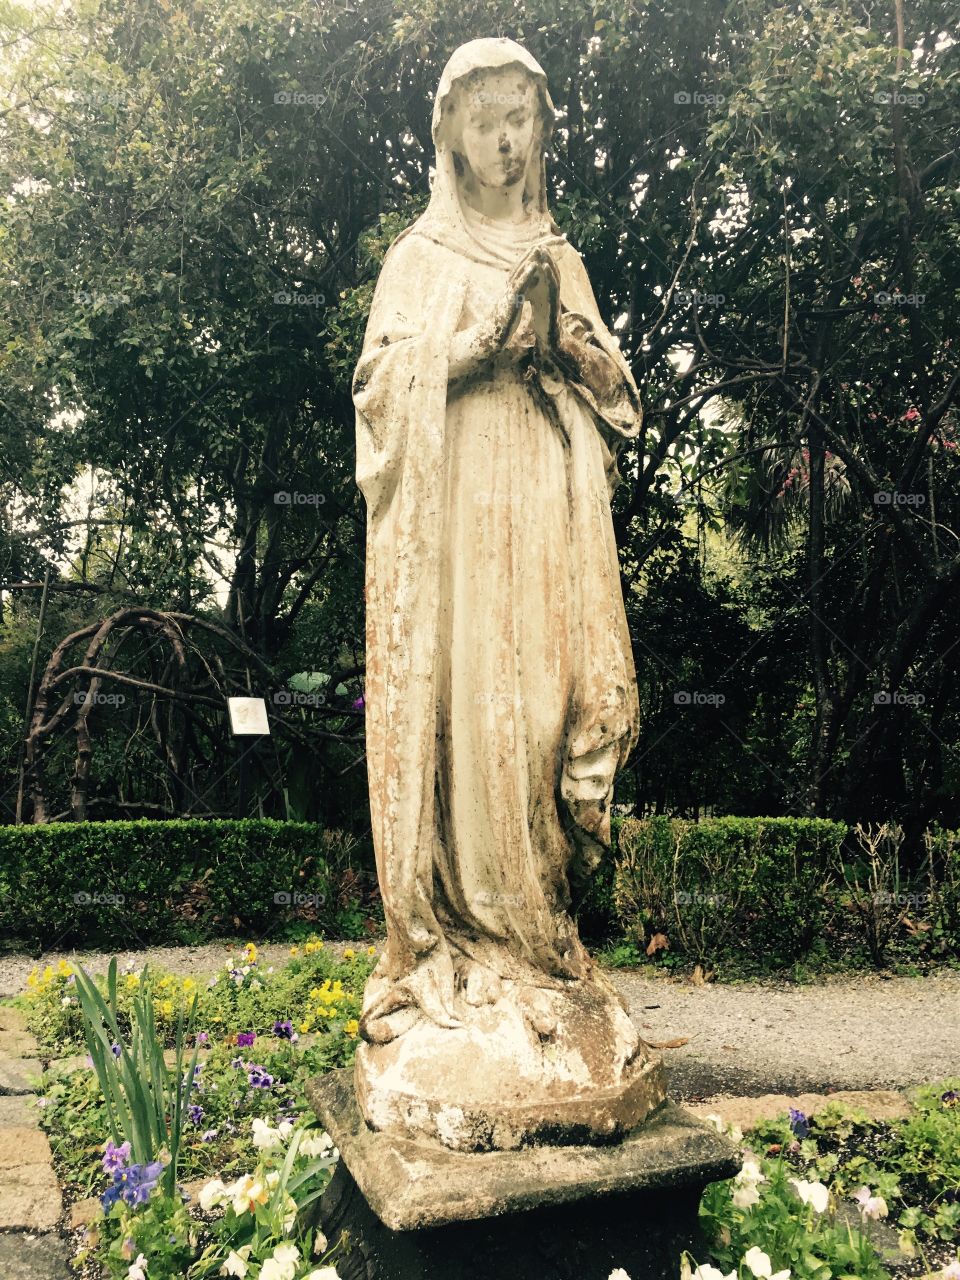 A statue of a woman watches over a garden